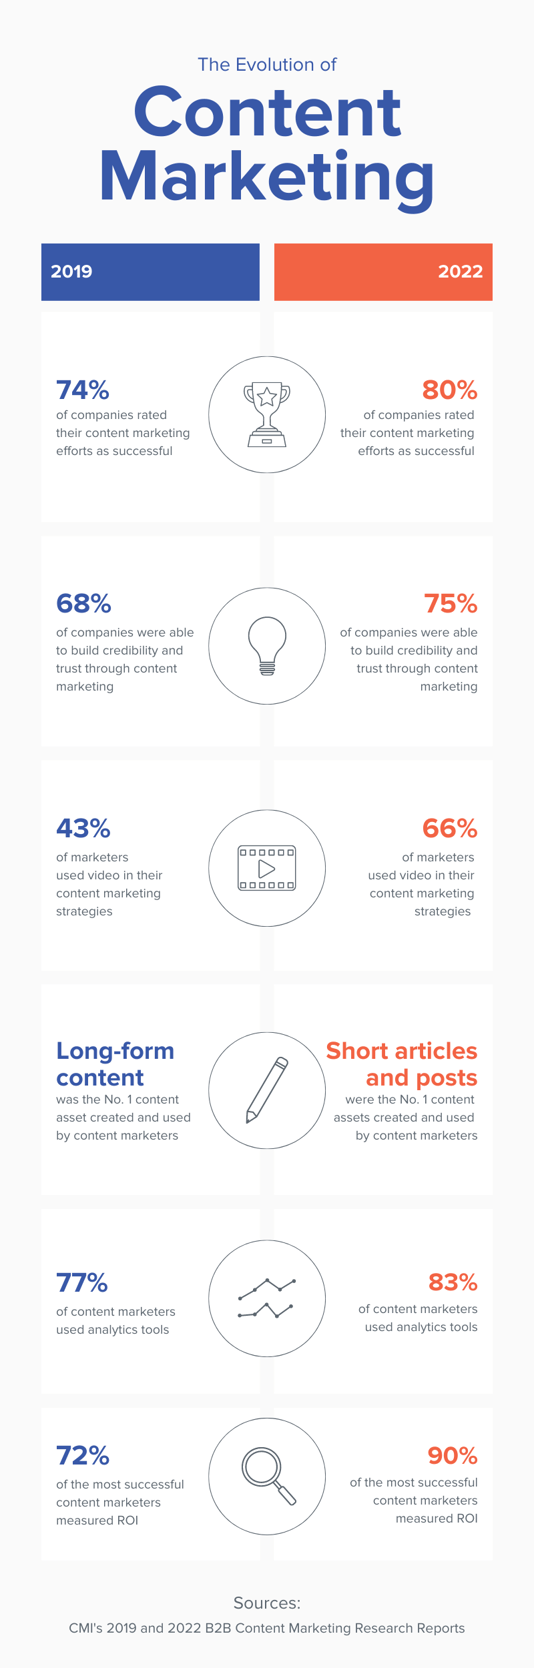 The Evolution of Content Marketing. In 2019, 74% of companies rated their content marketing efforts as successful. In 2022, 80% of companies rated their content marketing efforts as successful. In 2019, 68% of companies were able to build credibility and trust through content marketing. In 2022, 75% of companies were able to build credibility and trust through content marketing. In 2019, 43% of marketers used video in their content marketing strategies. In 2022, 66% of marketers used video in their content marketing strategies. In 2019, long-form content was the No. 1 content asset created and used by content marketers. In 2022, short articles and posts were the No. 1 content assets created and used by content marketers. In 2019, 77% of content marketers used analytics tools. In 2022, 83% of content marketers used analytics tools. In 2019, 72% of the most successful content marketers measured ROI. In 2022, 90% of the most successful content marketers measured ROI. Sources: CMI's 2019 and 2022 B2B Content Marketing Research Reports